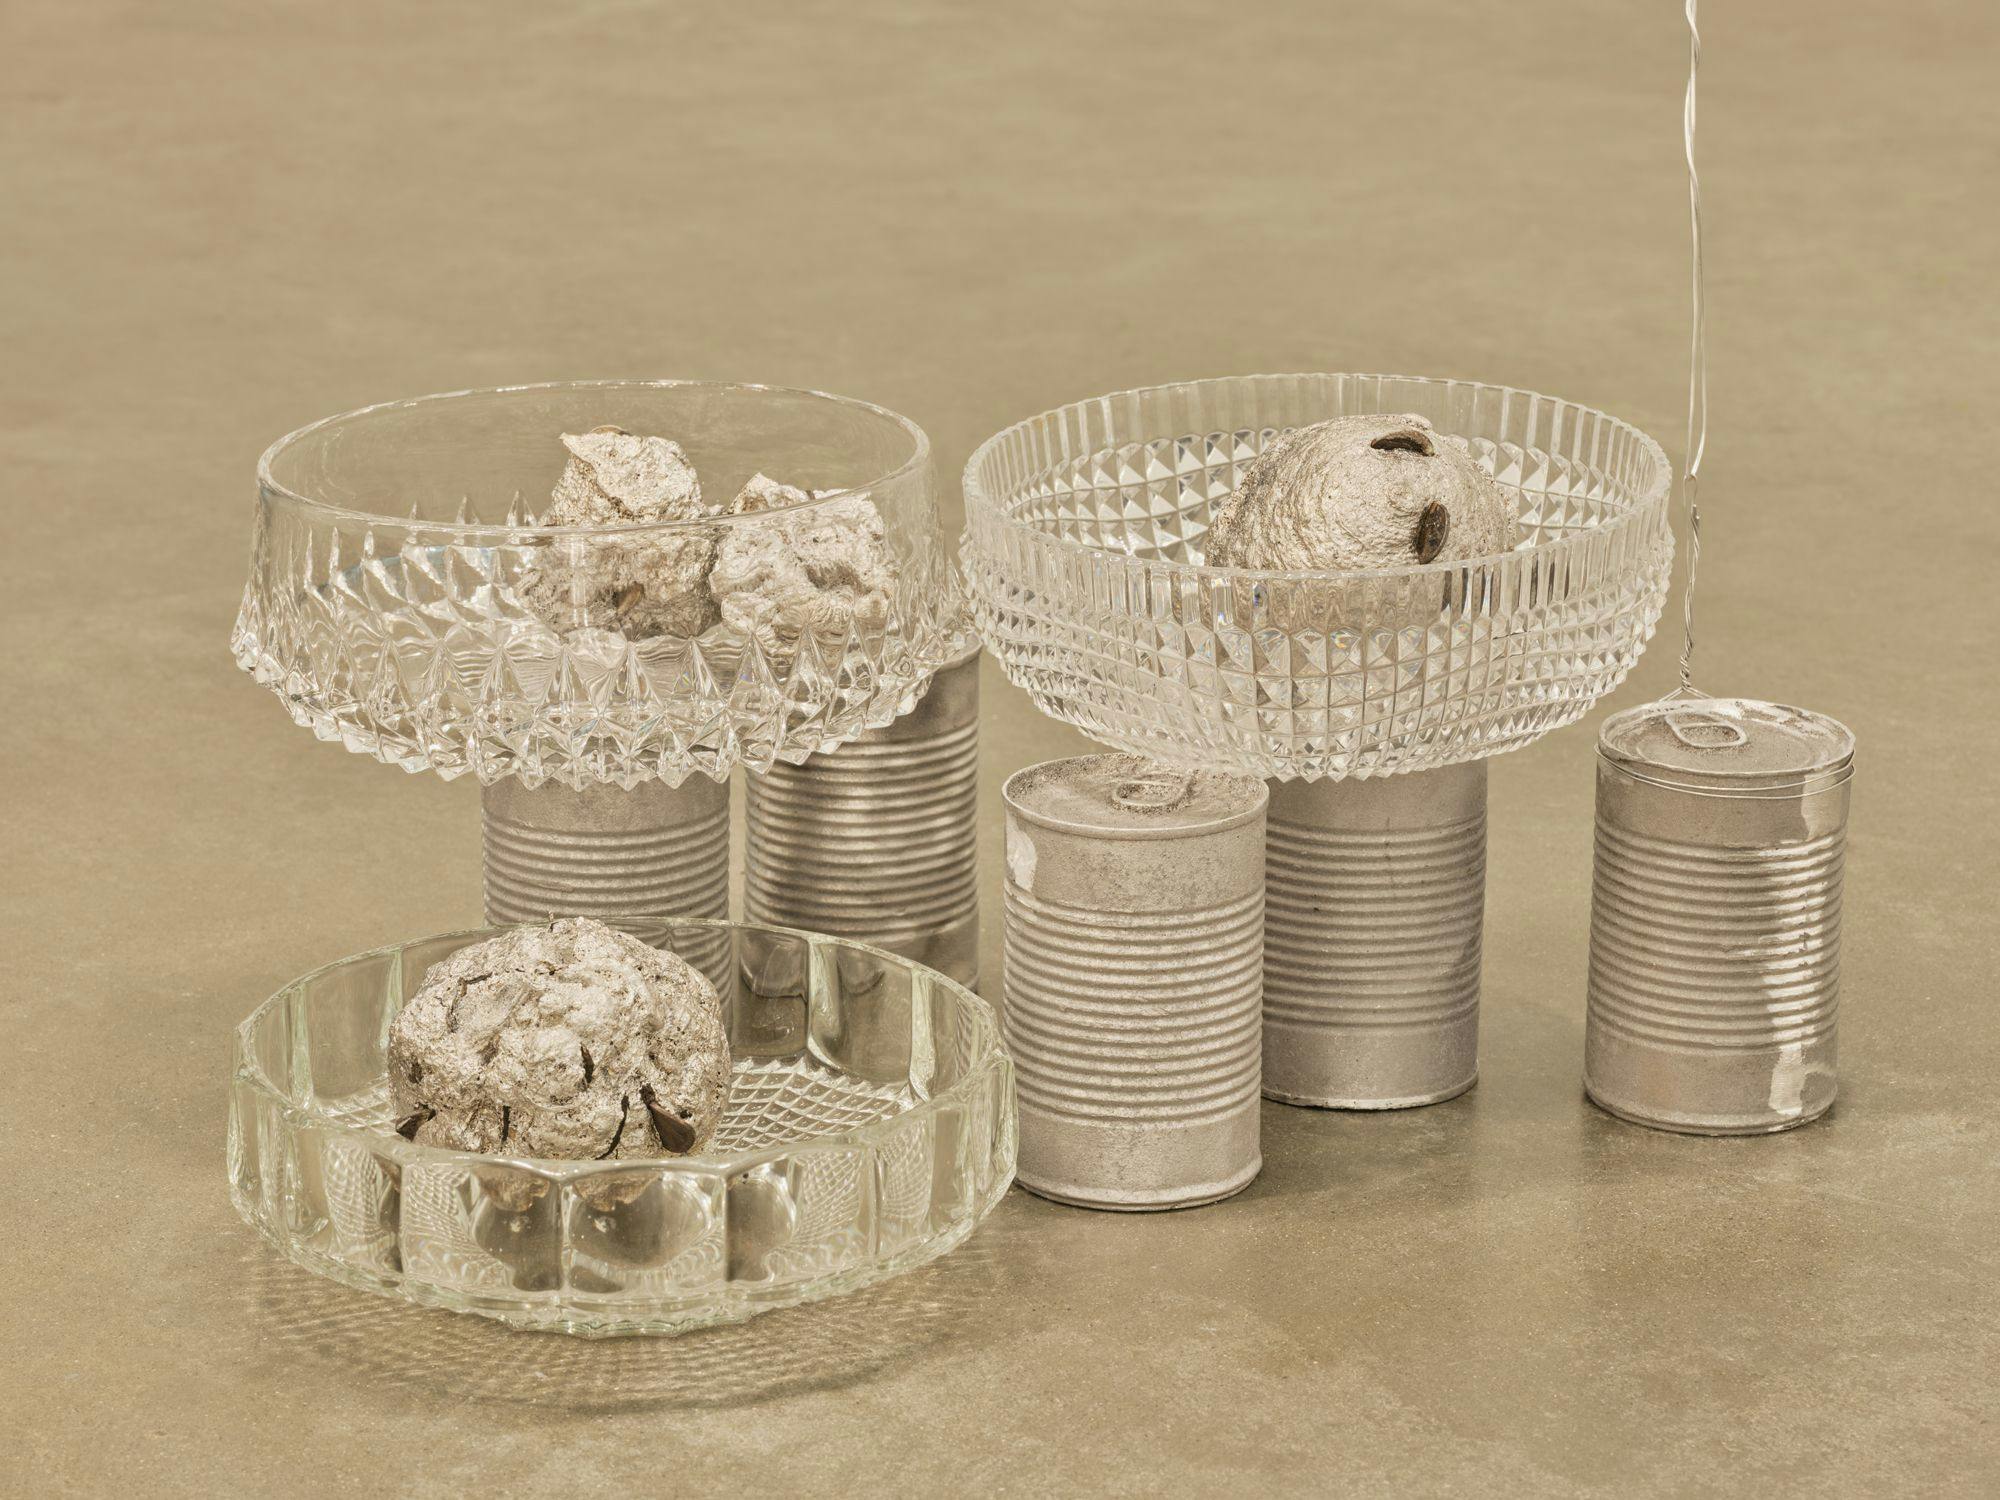 A sculpture comprised of three glass bowls and five aluminum cans. One of the cans is tied to wire that stretches out of frame.